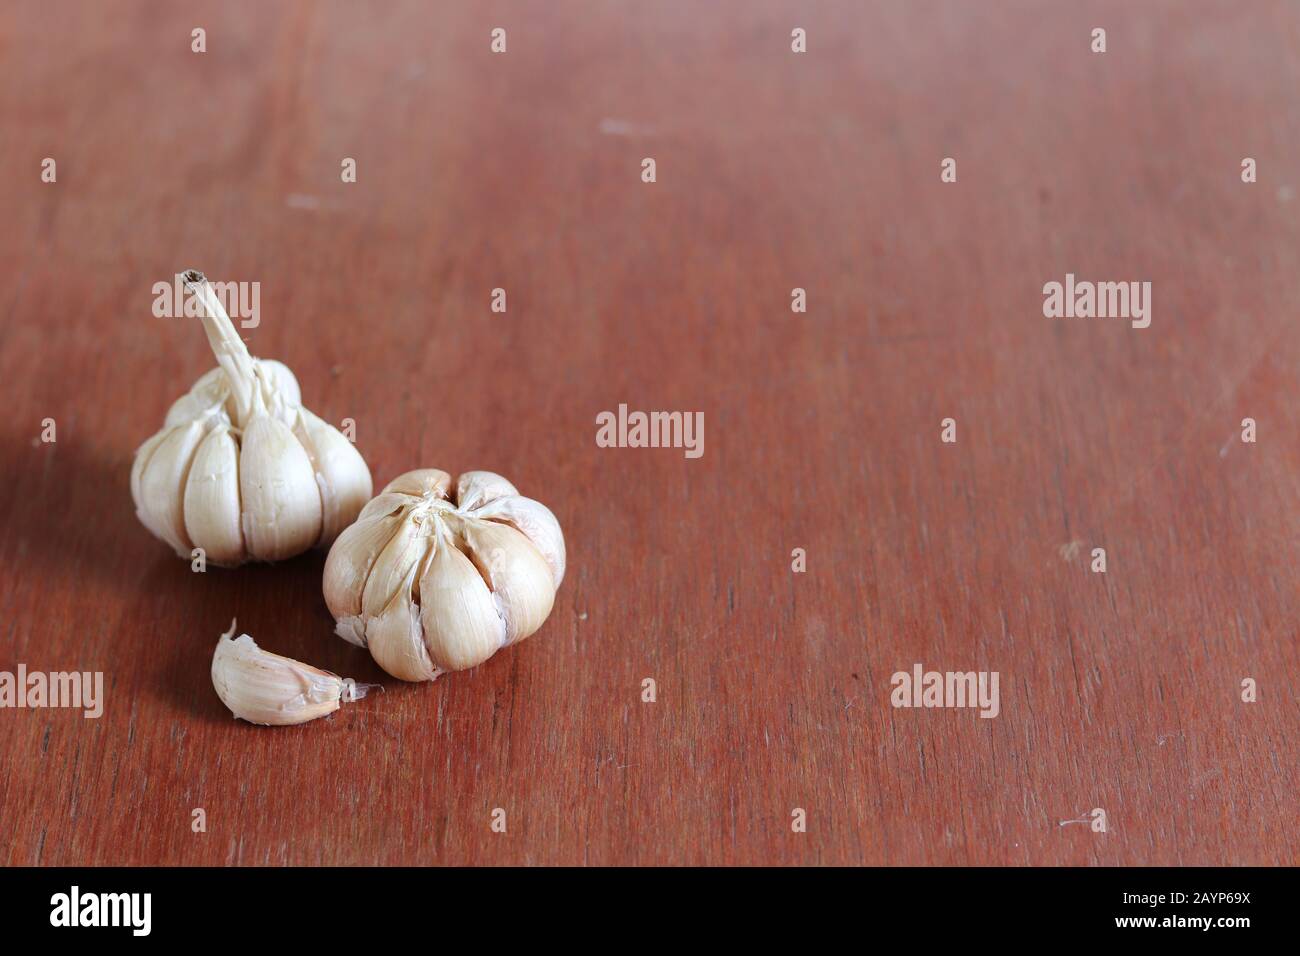 Garlic bulbs against a wooden background to show concept of gastronomy, ayurveda cooking and alternative medicine Stock Photo